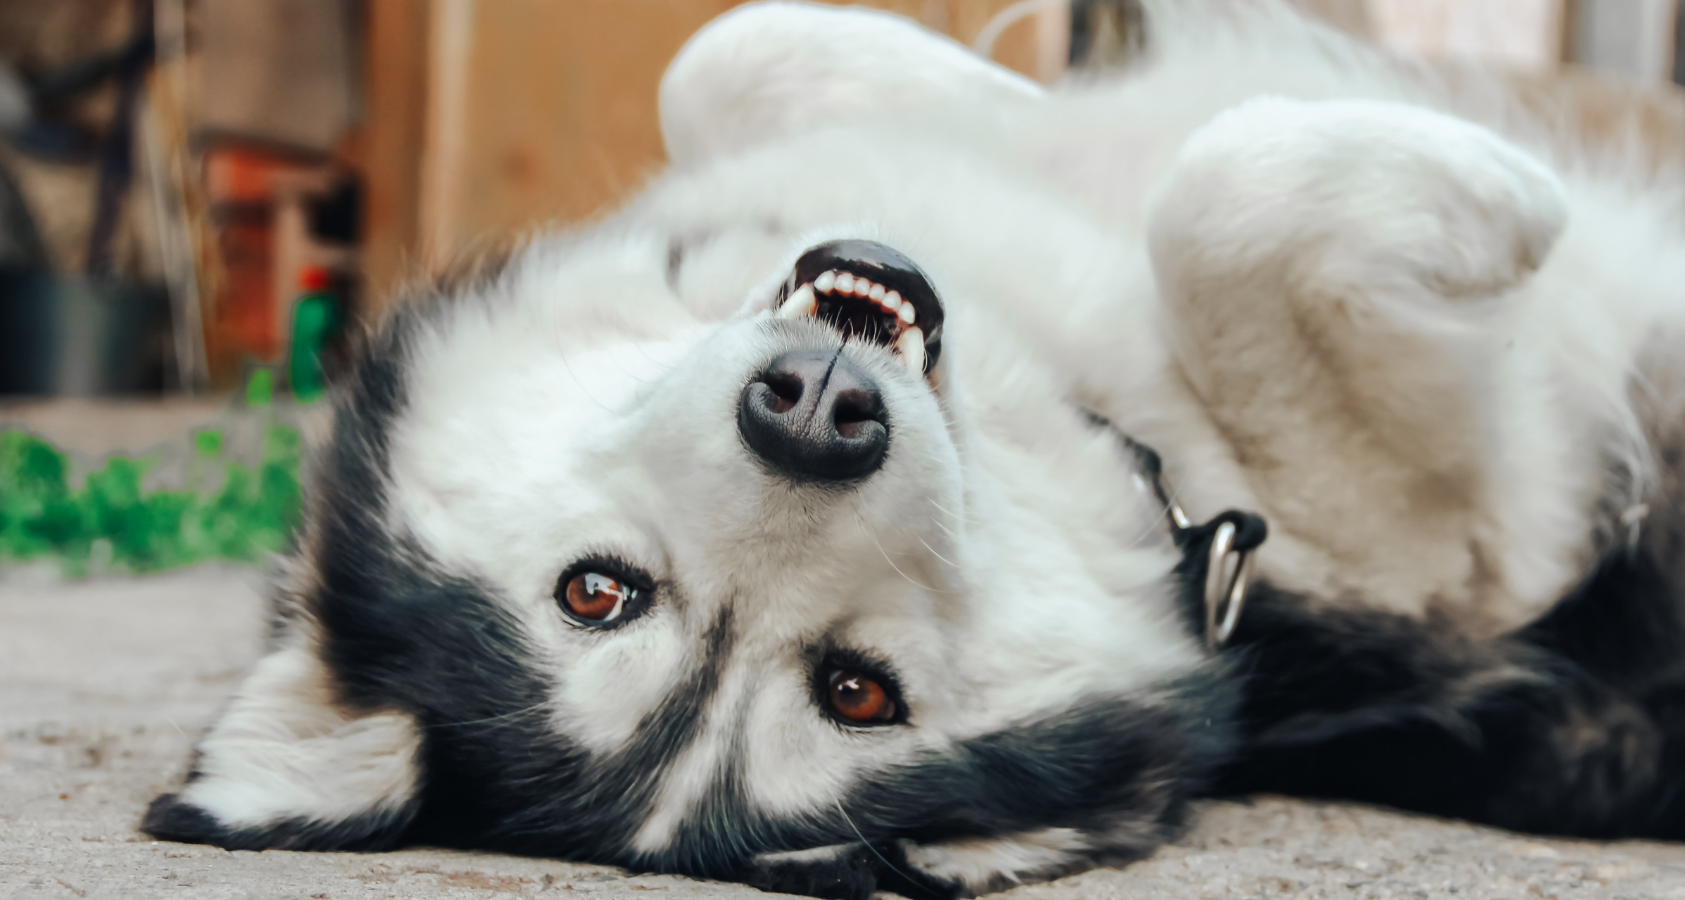 Why Do Dogs Sleep on Their Backs? Meaning Revealed!